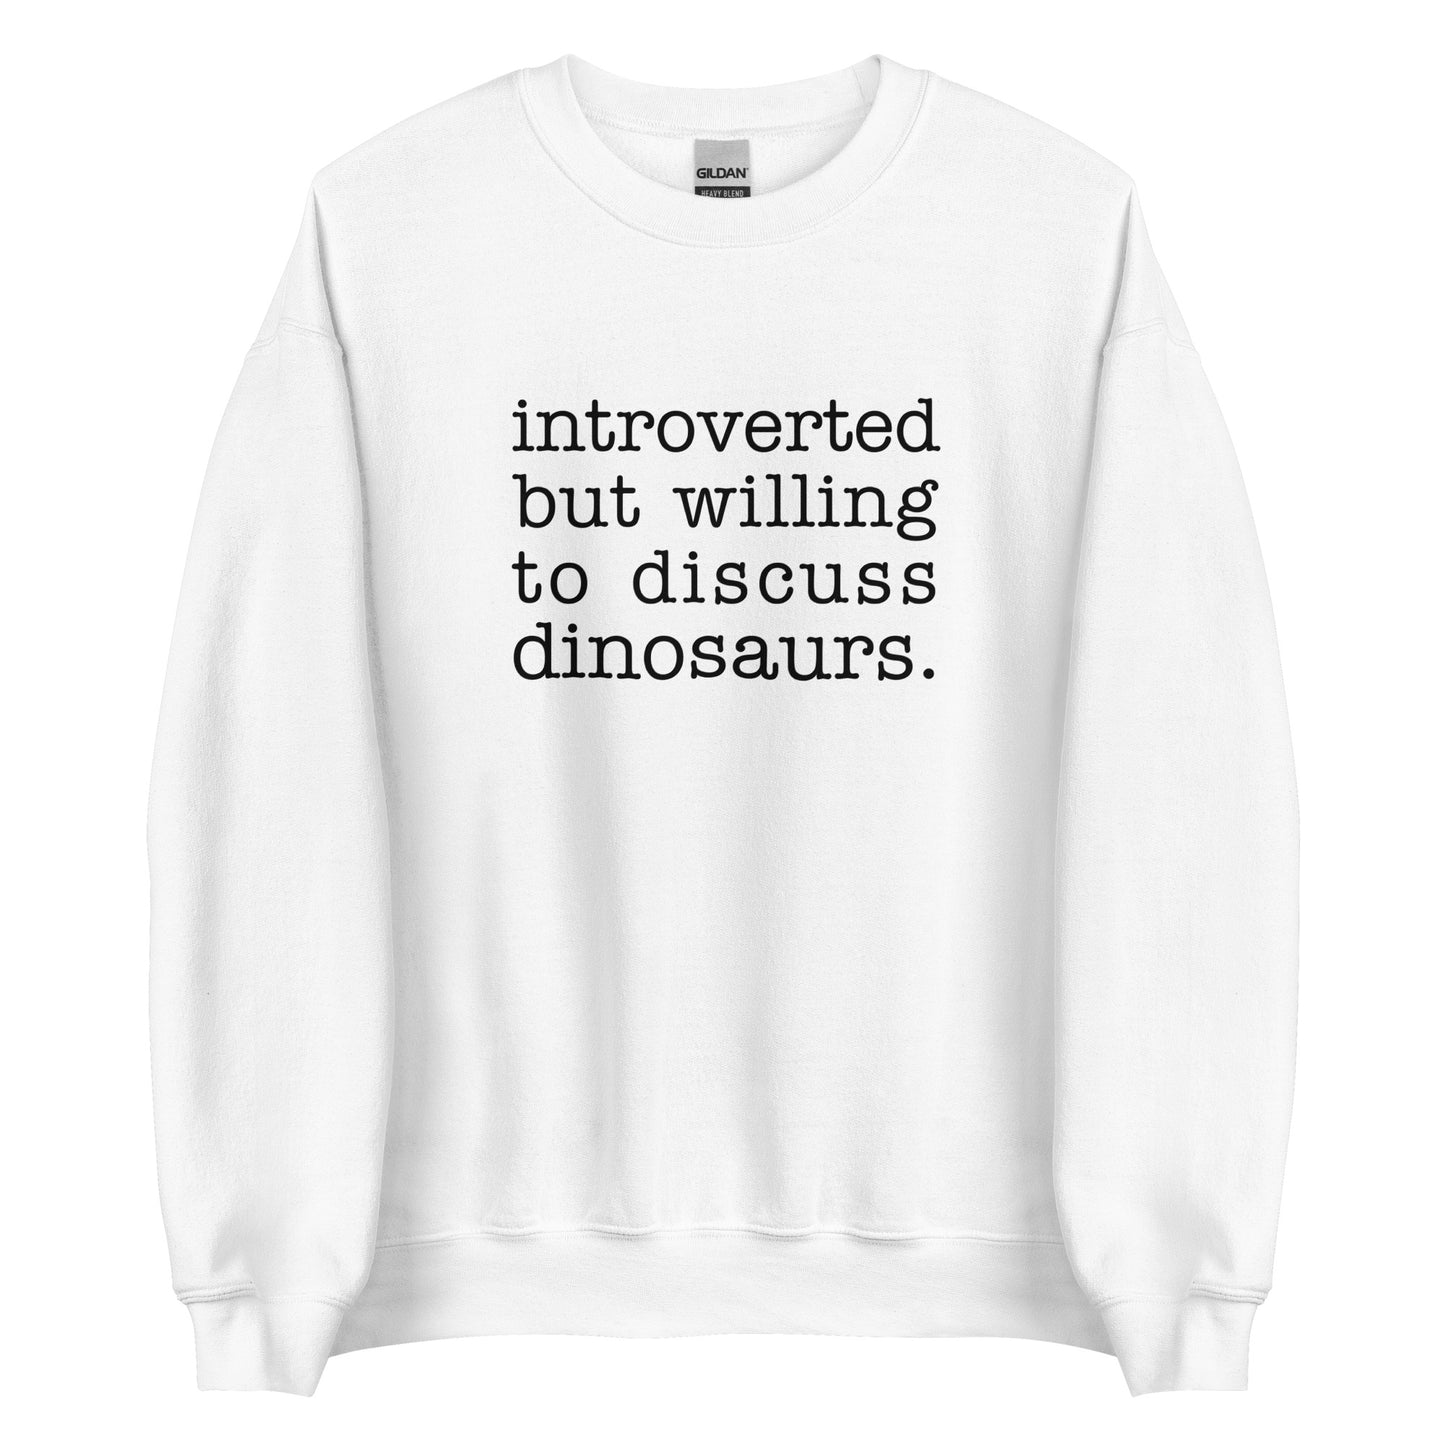 A white crewneck sweatshirt with black text reading "introverted but willing to discuss dinosaurs"